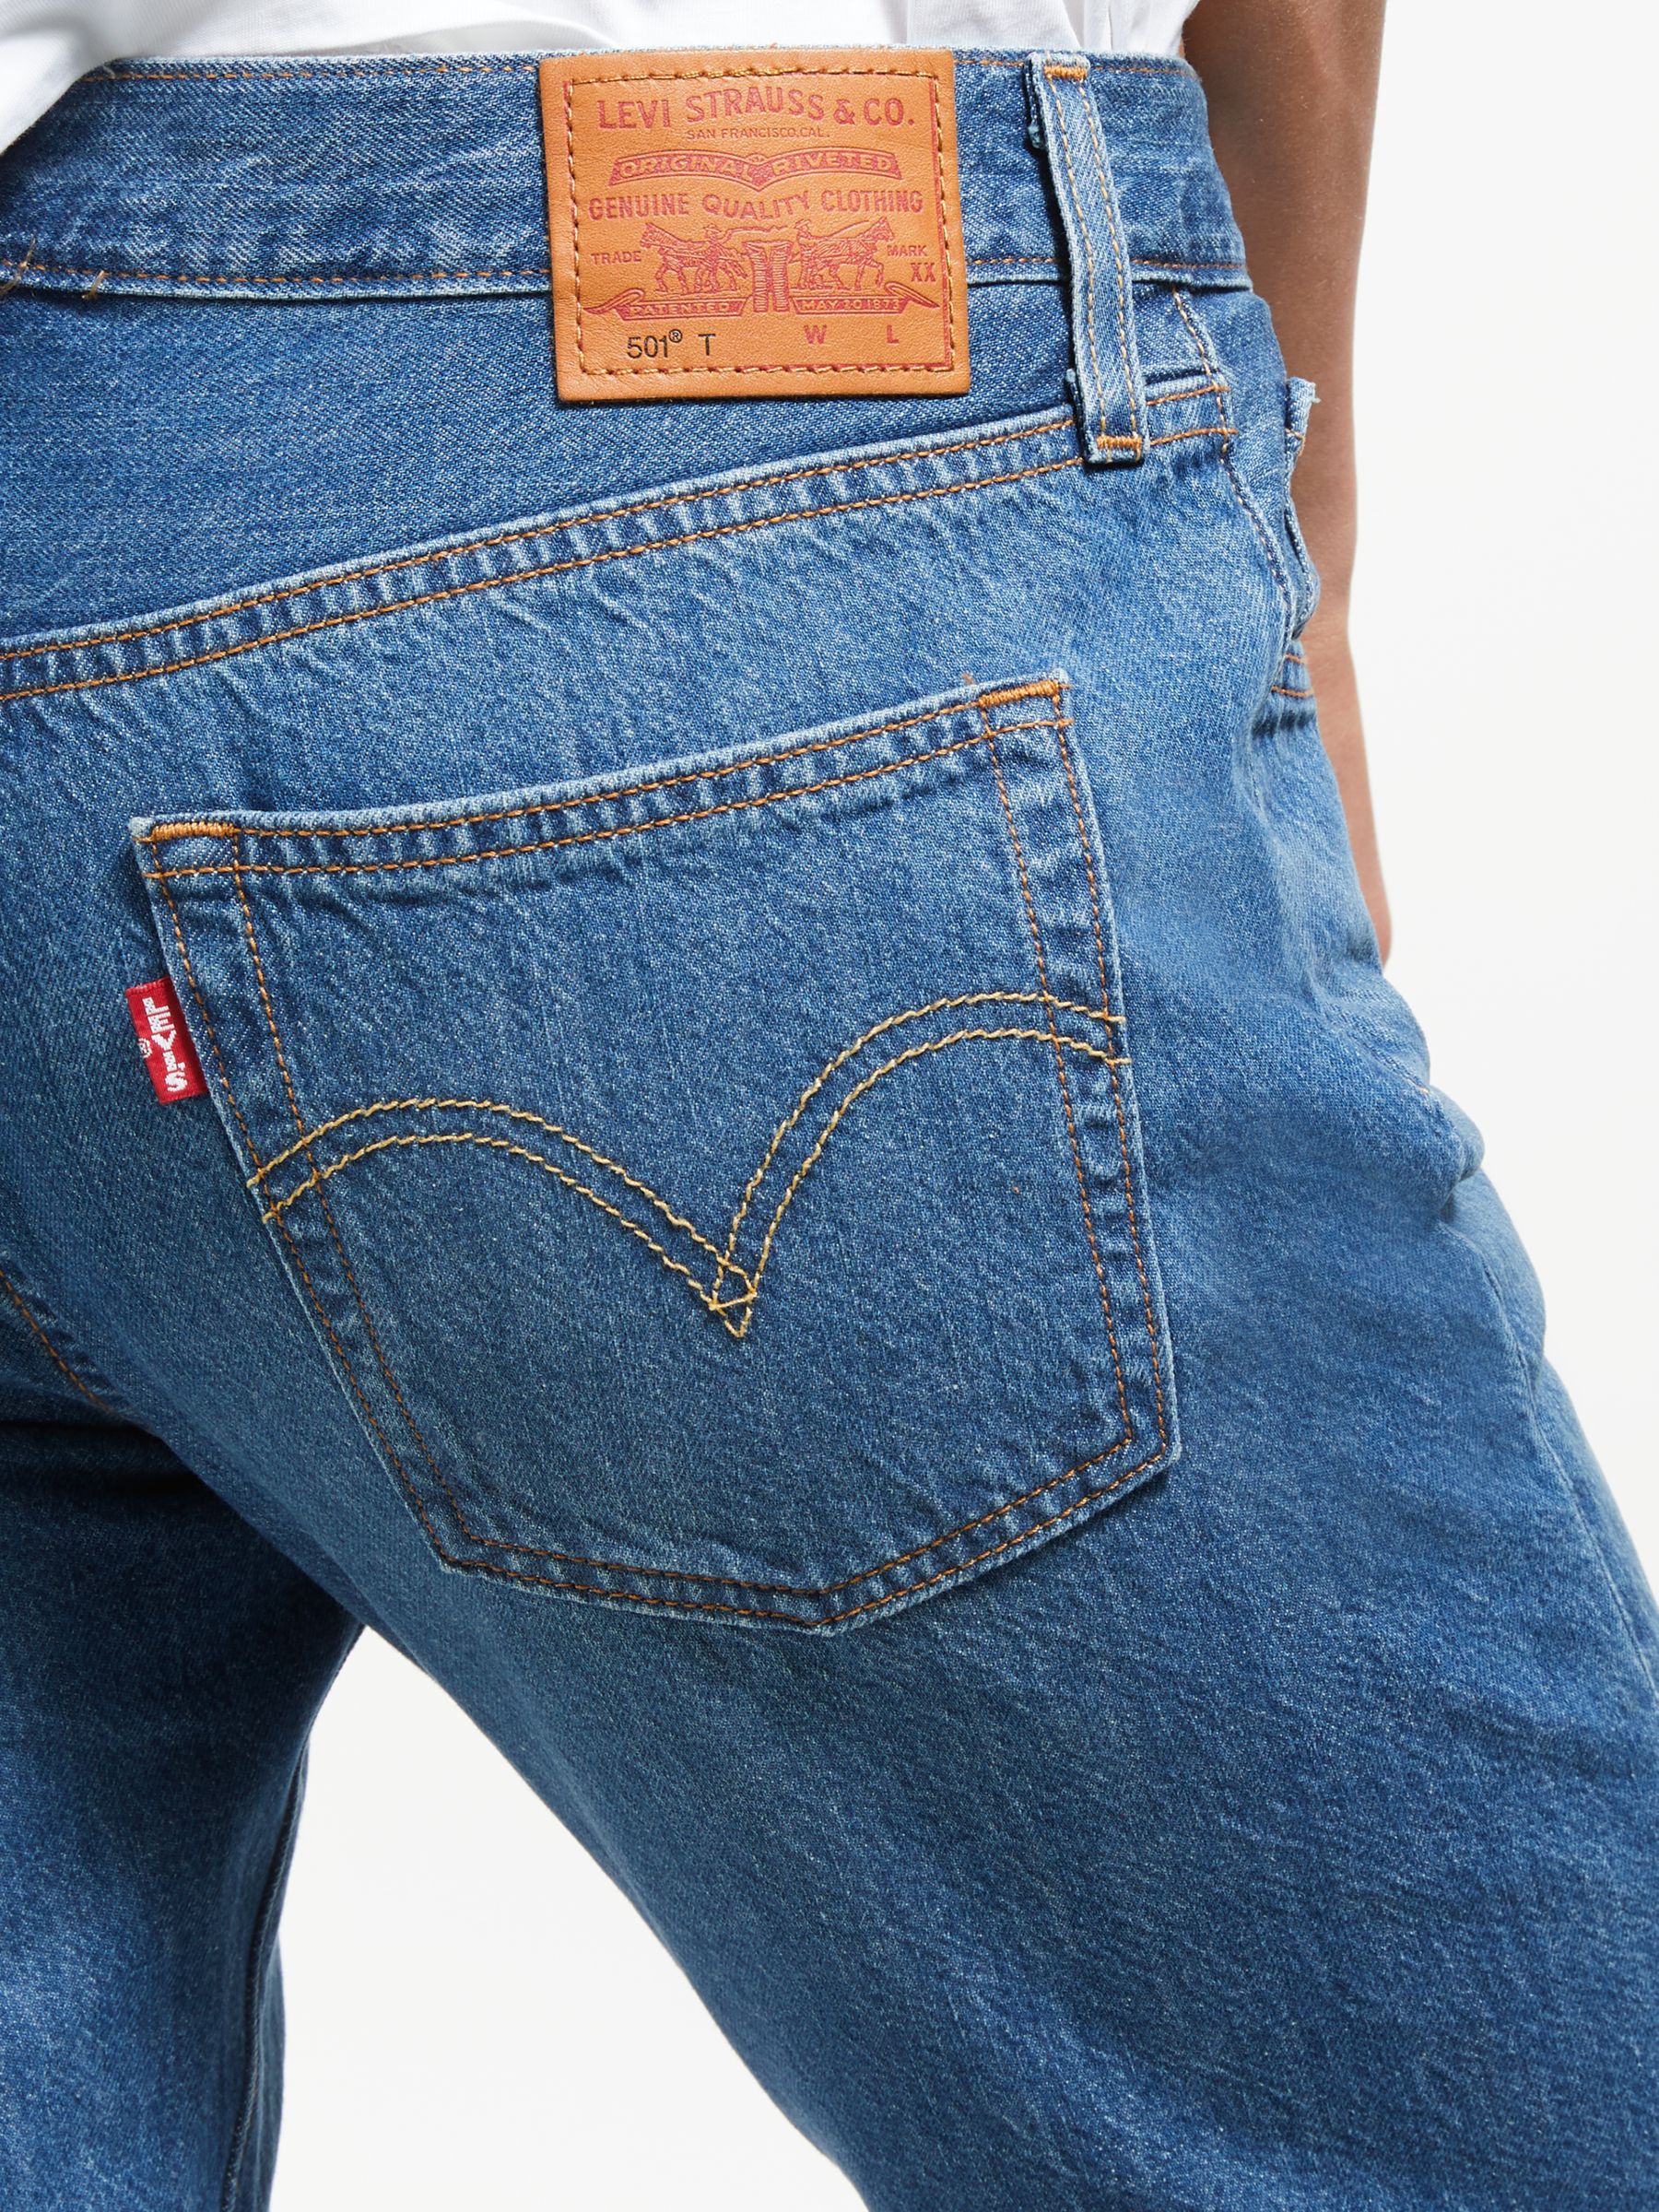 Levi's 501 Taper Jeans, Forever Your Girl, 27